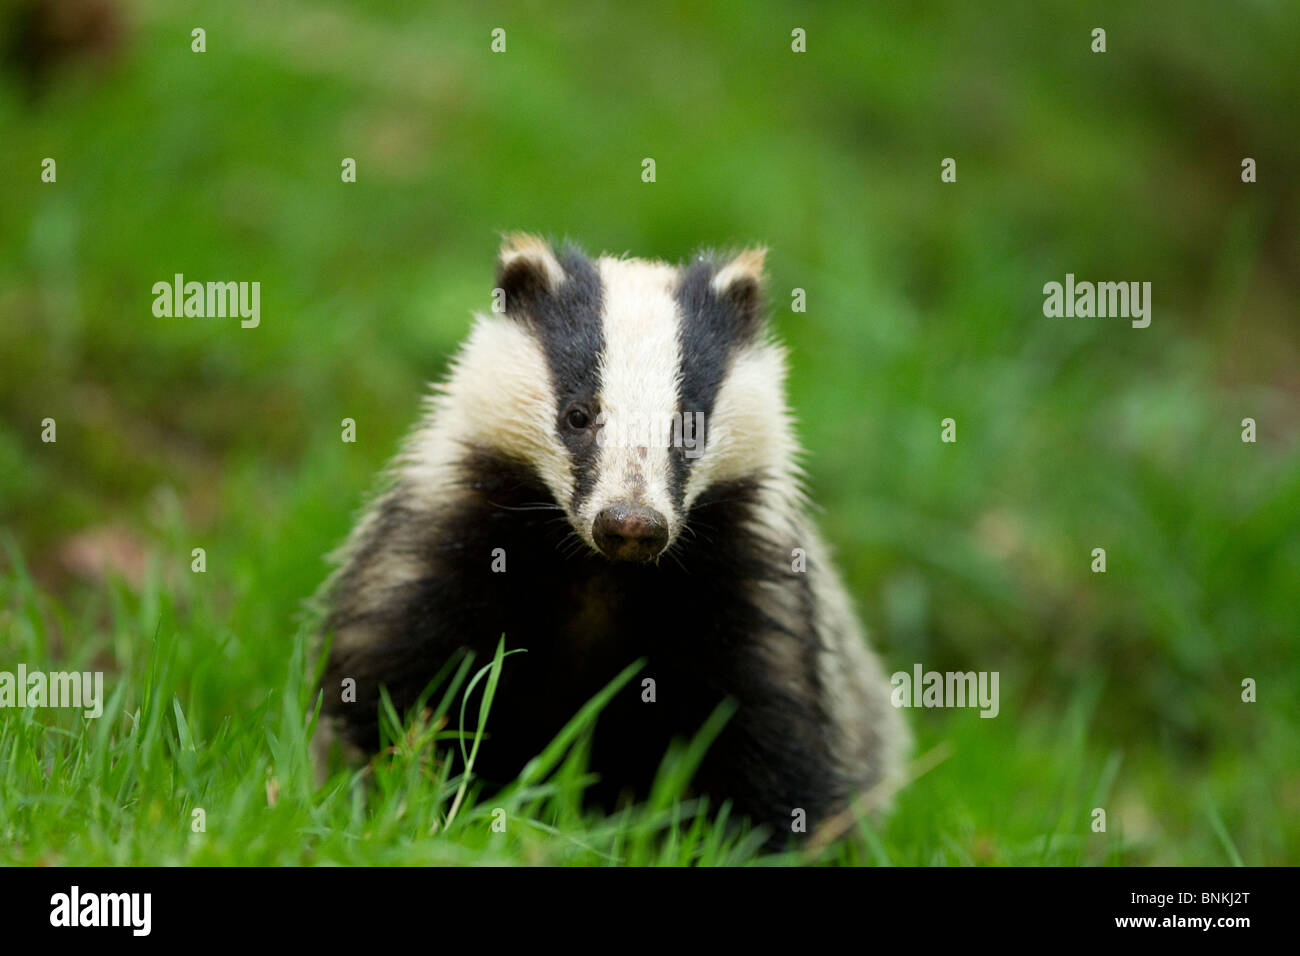 a badger looks up from feeding in a woodland environment Stock Photo